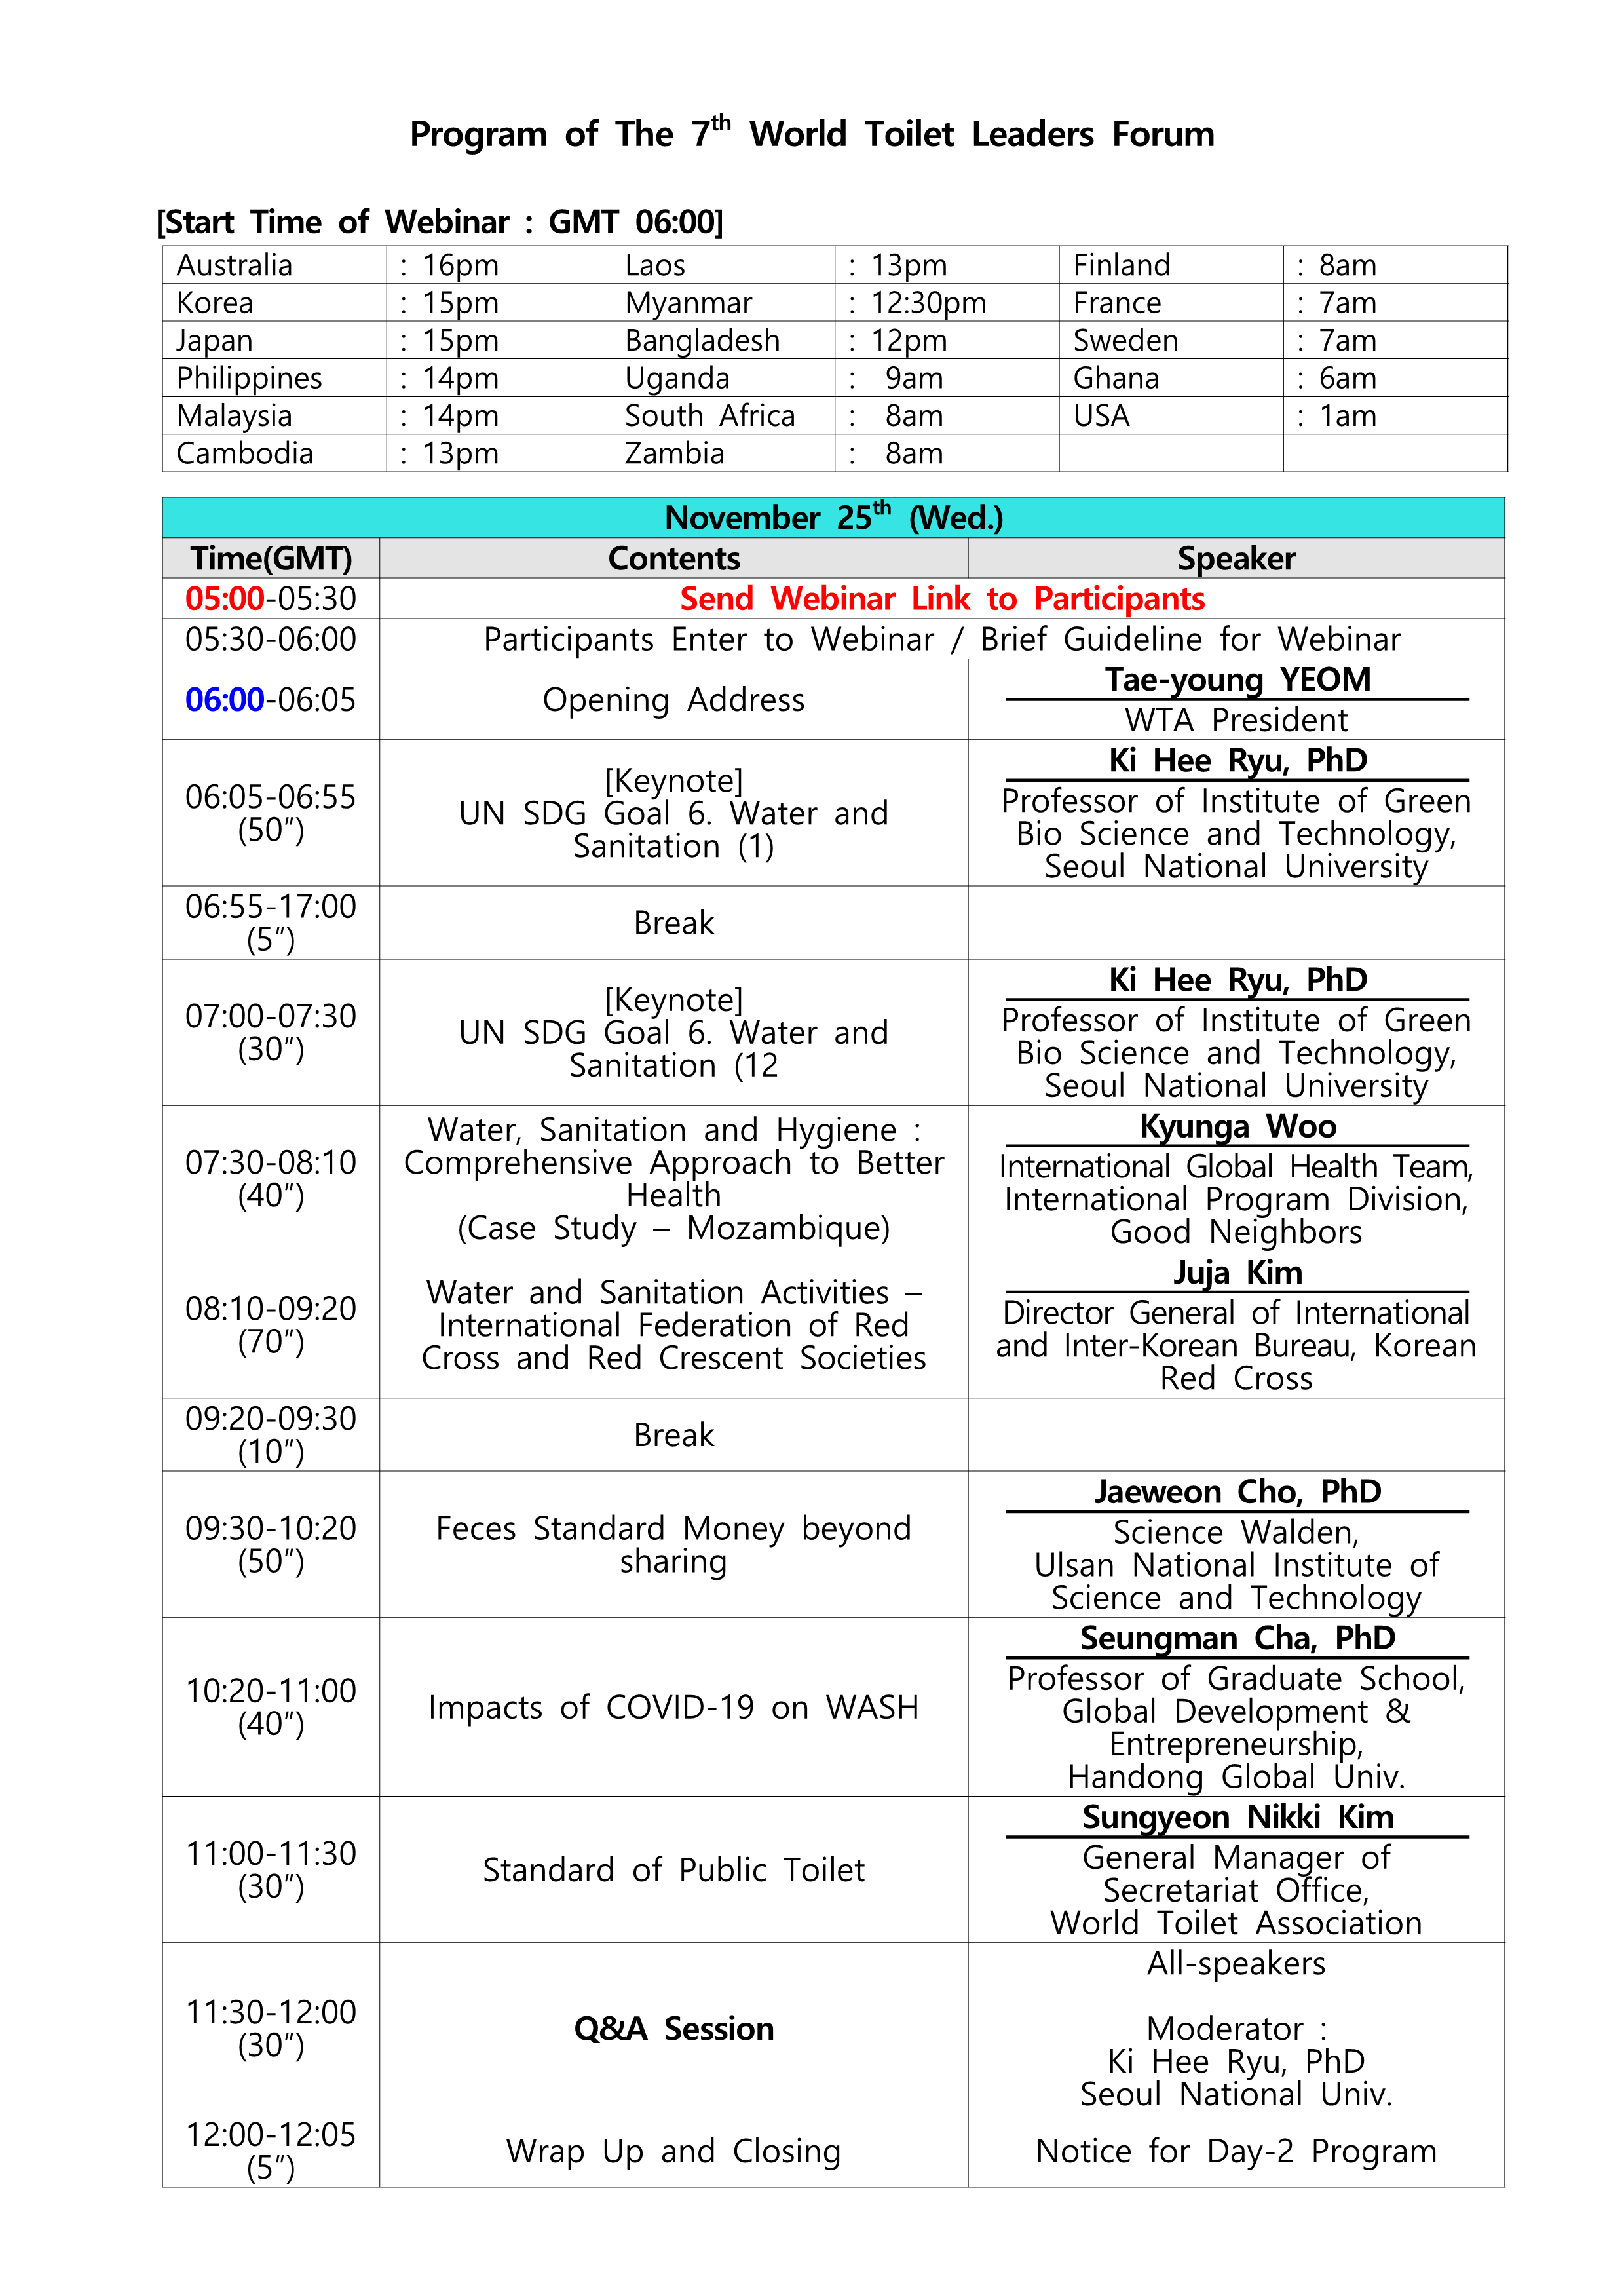 Program of The 7th World Toilet Leaders Forum_1.png